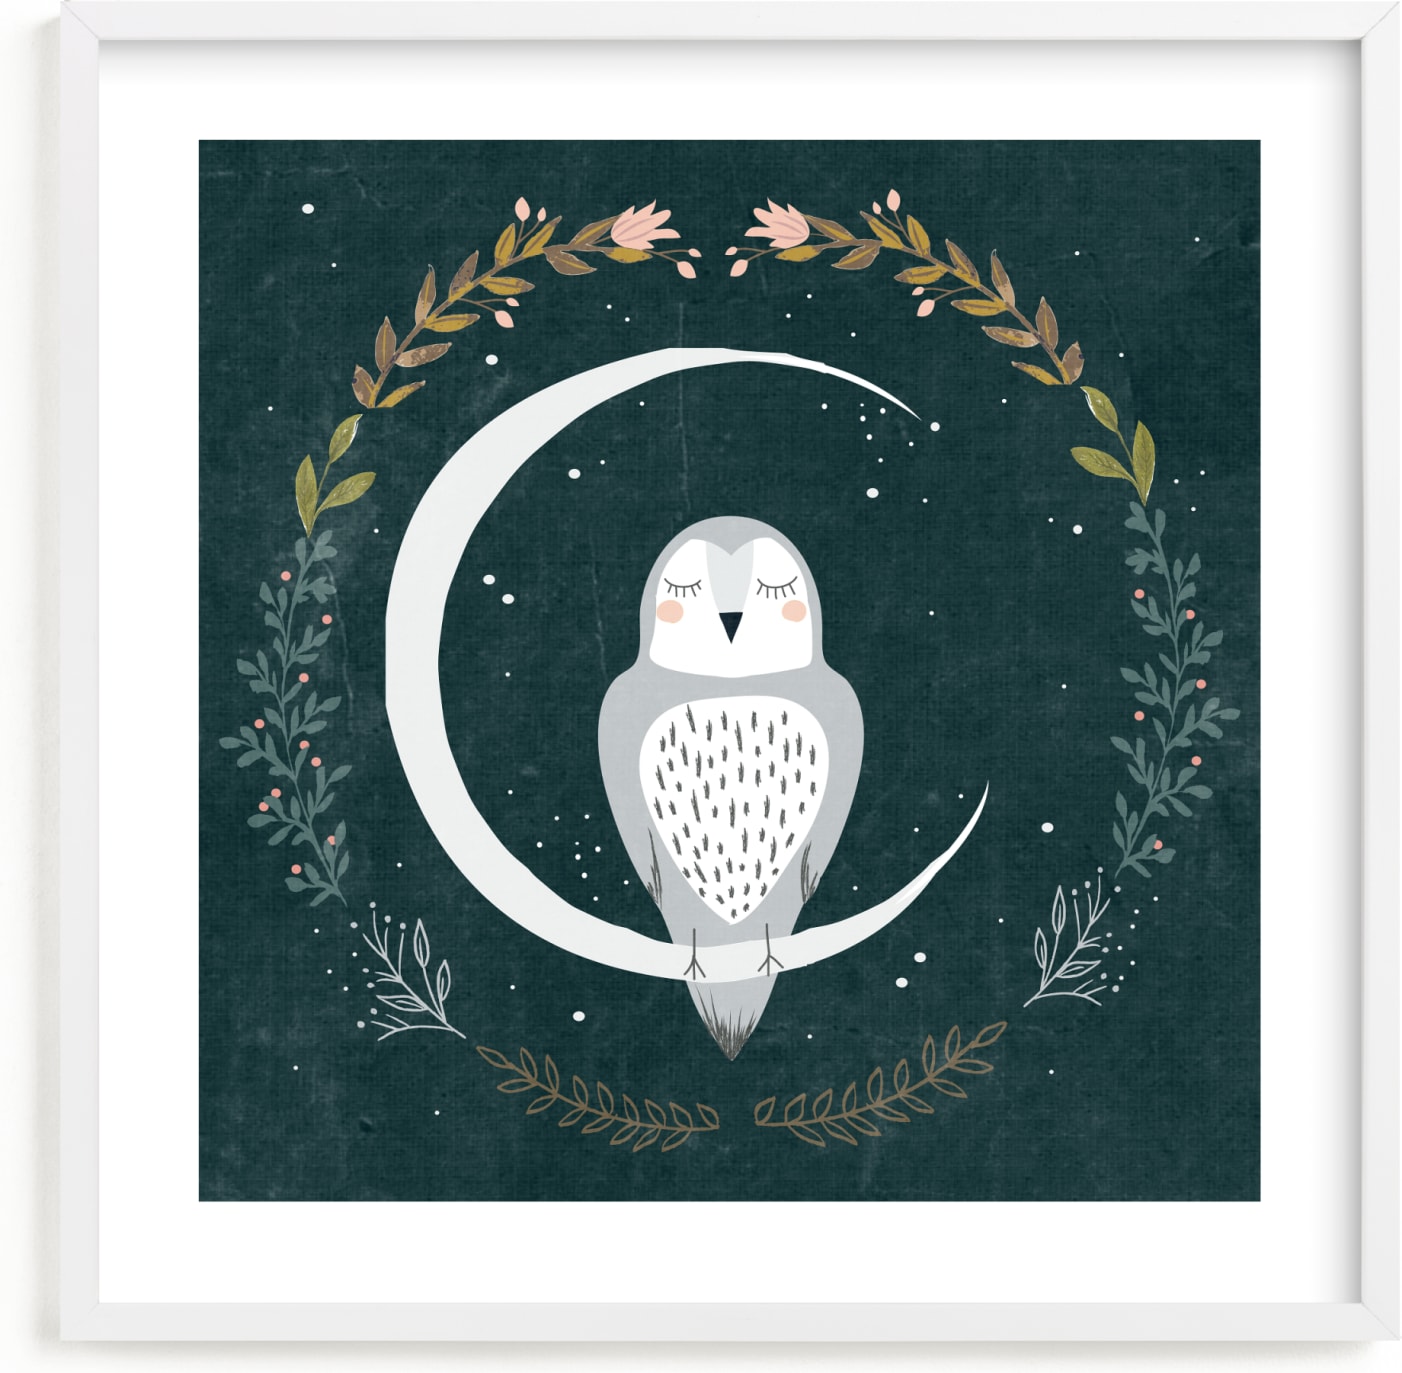 This is a colorful art by Hannah Williams called Moon and Owl.